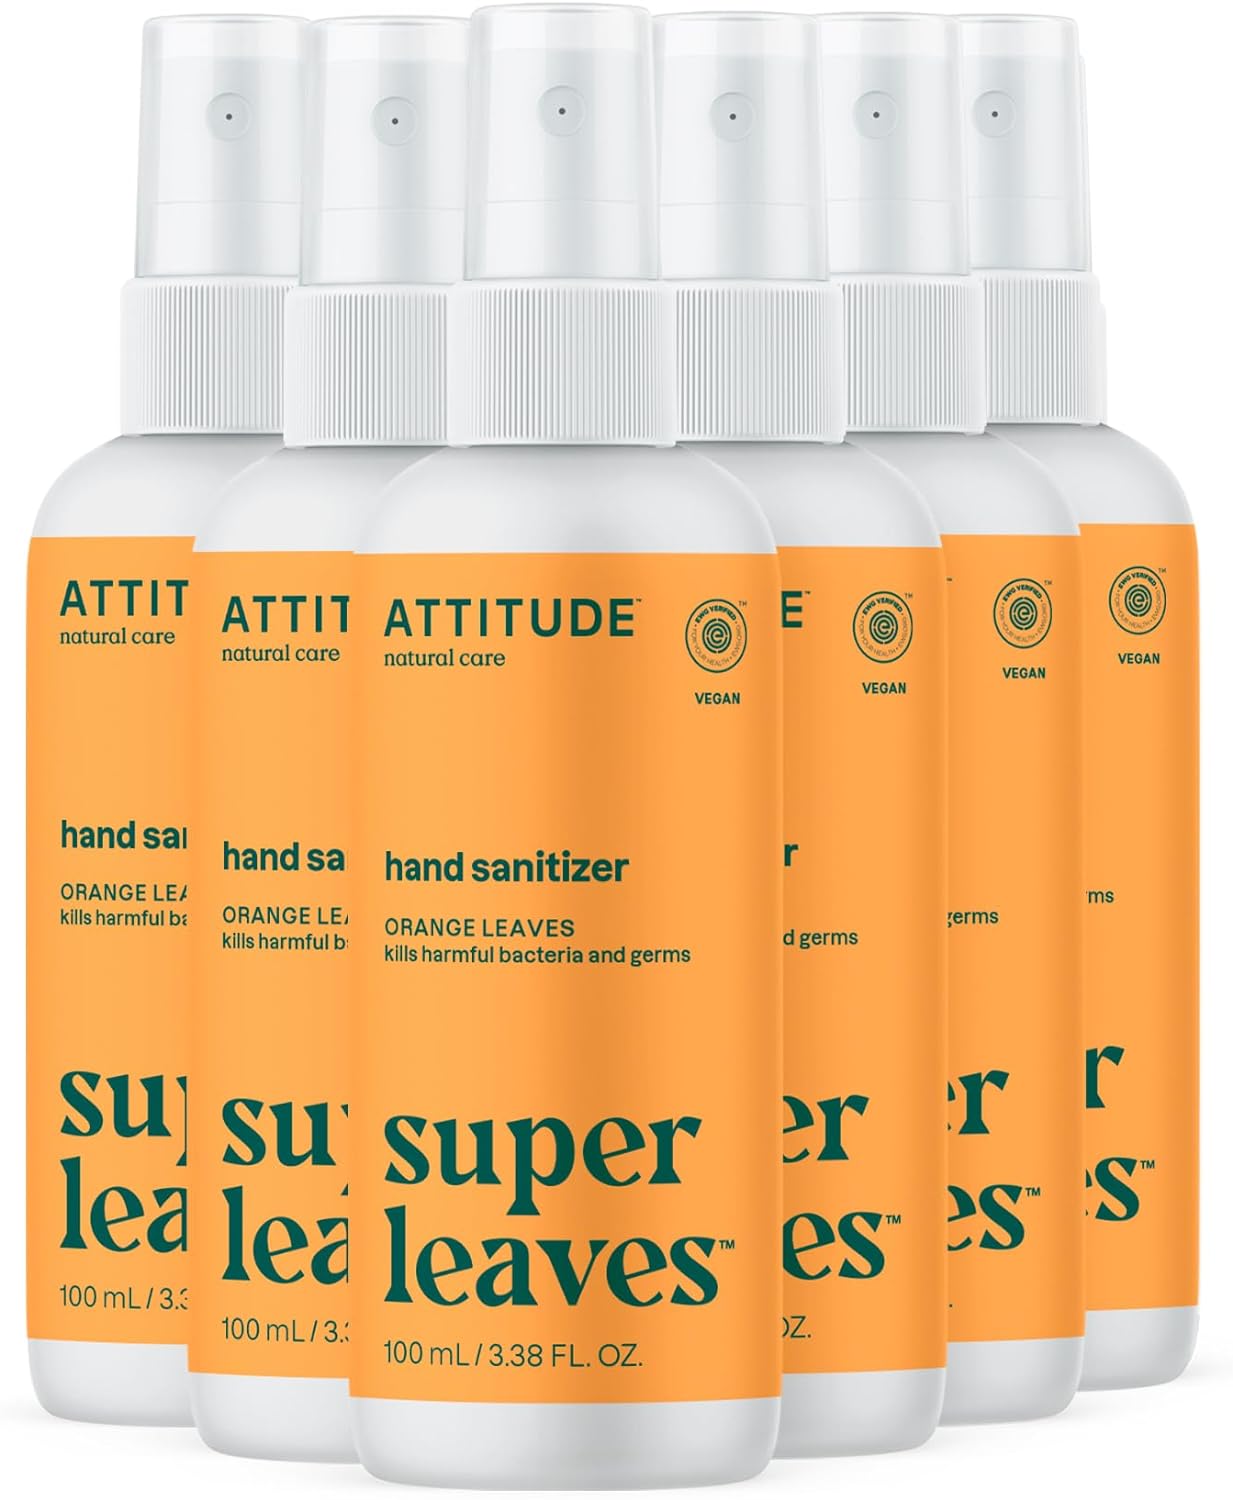 ATTITUDE Hand Sanitizer Spray for Adults and Kids, EWG Verified, Kills Bacteria and Germs, Vegan, Orange Leaves, 3.38 Fl Oz (Spray Bottle) (Pack of 6)